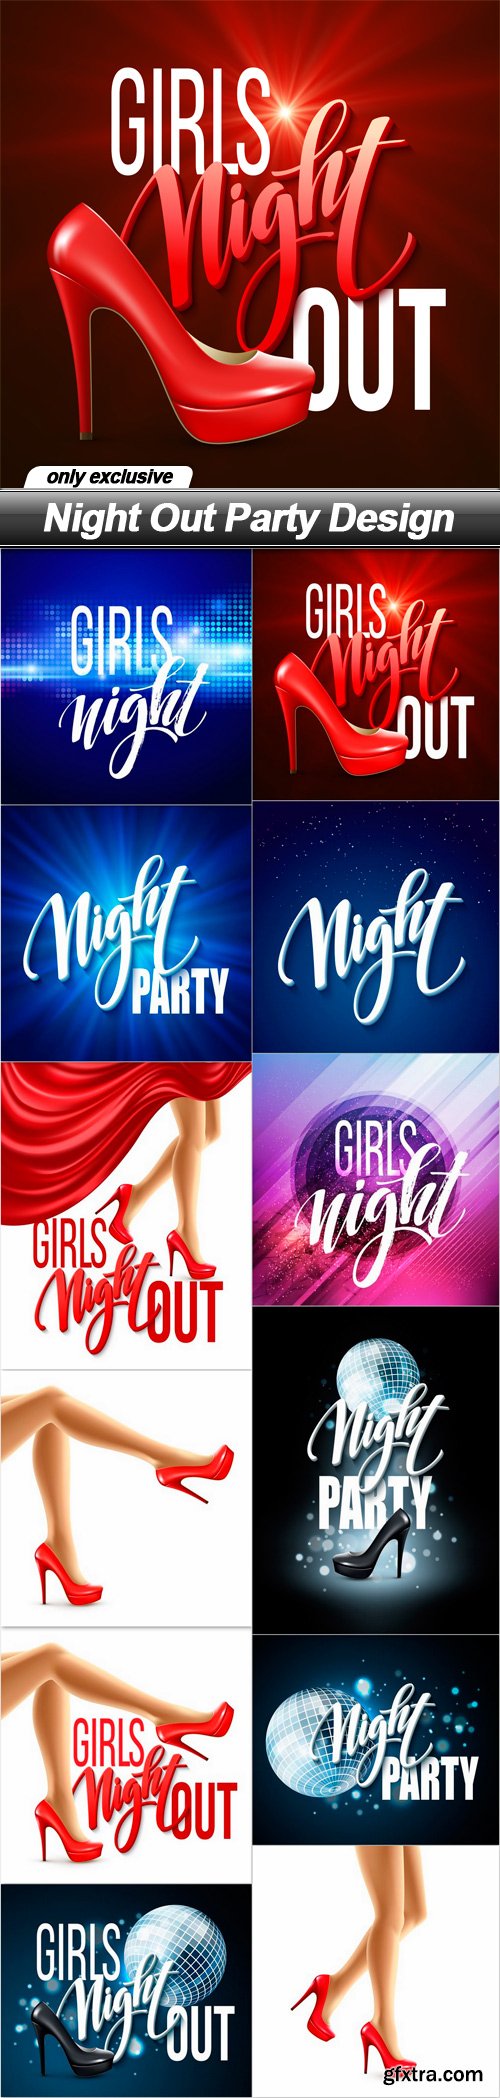 Night Out Party Design - 12 EPS